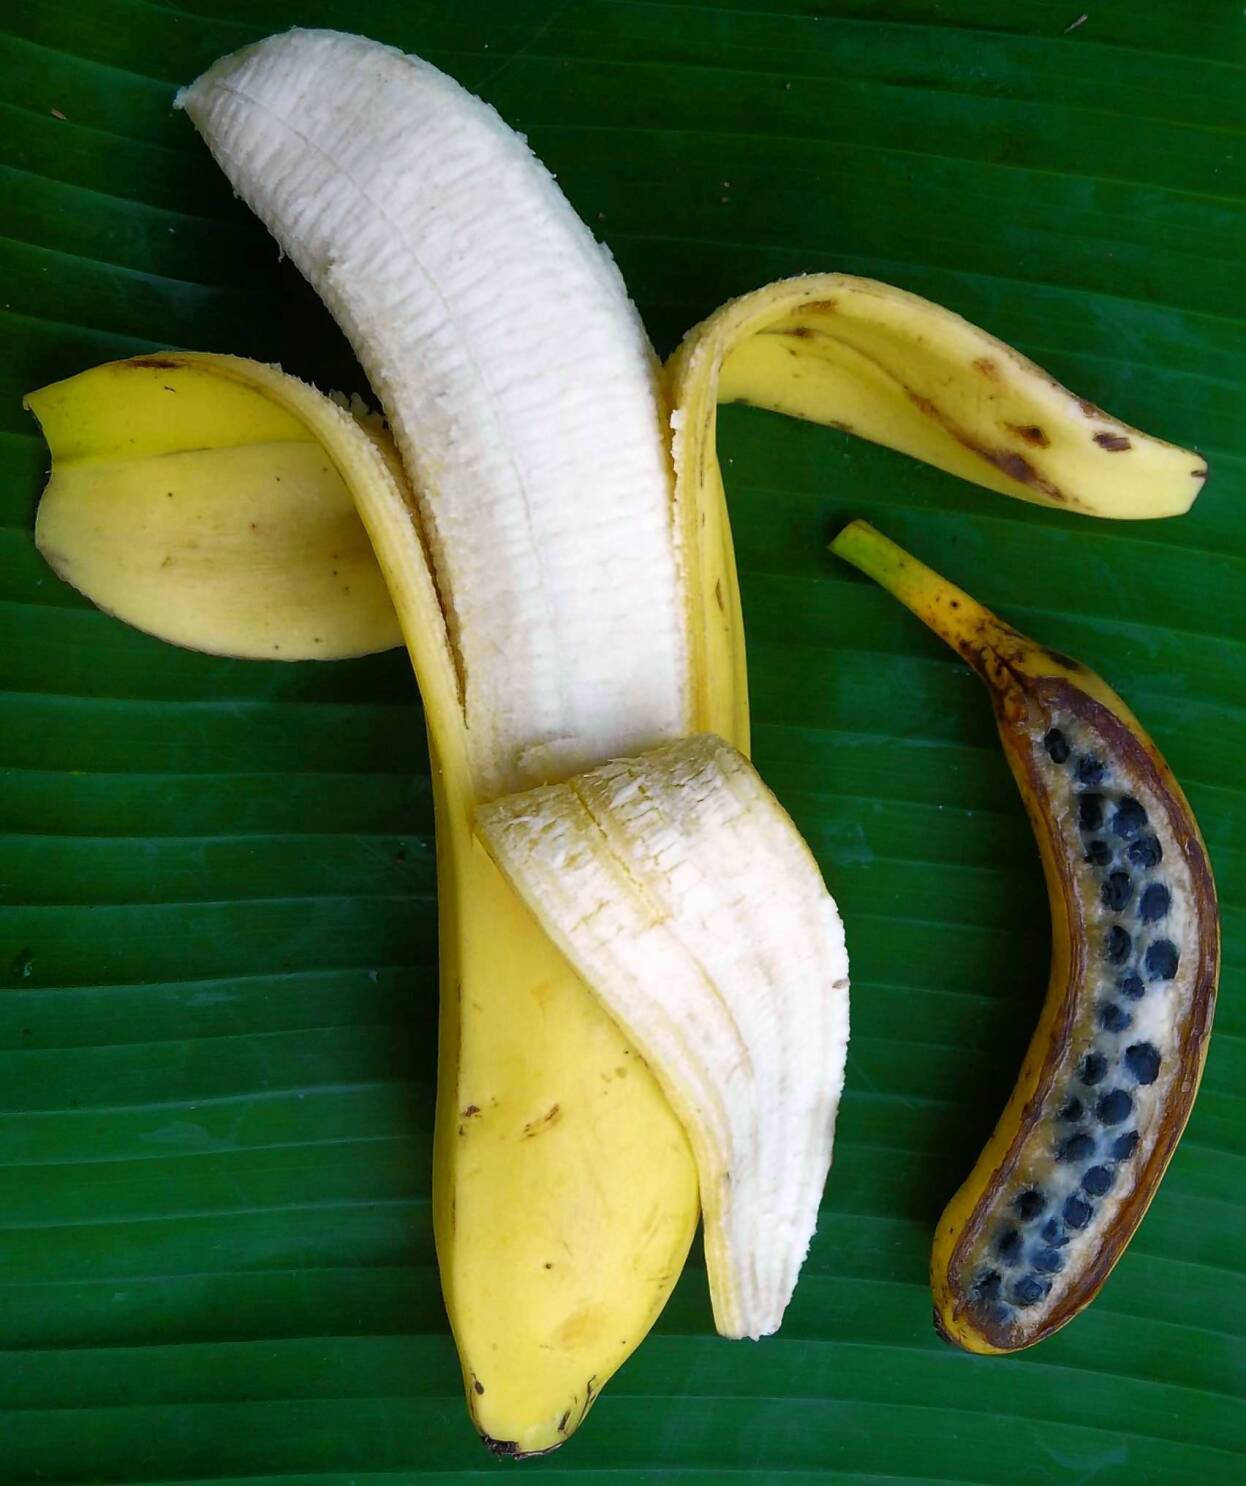 The Battle of Bananas: Conventional vs. Organic